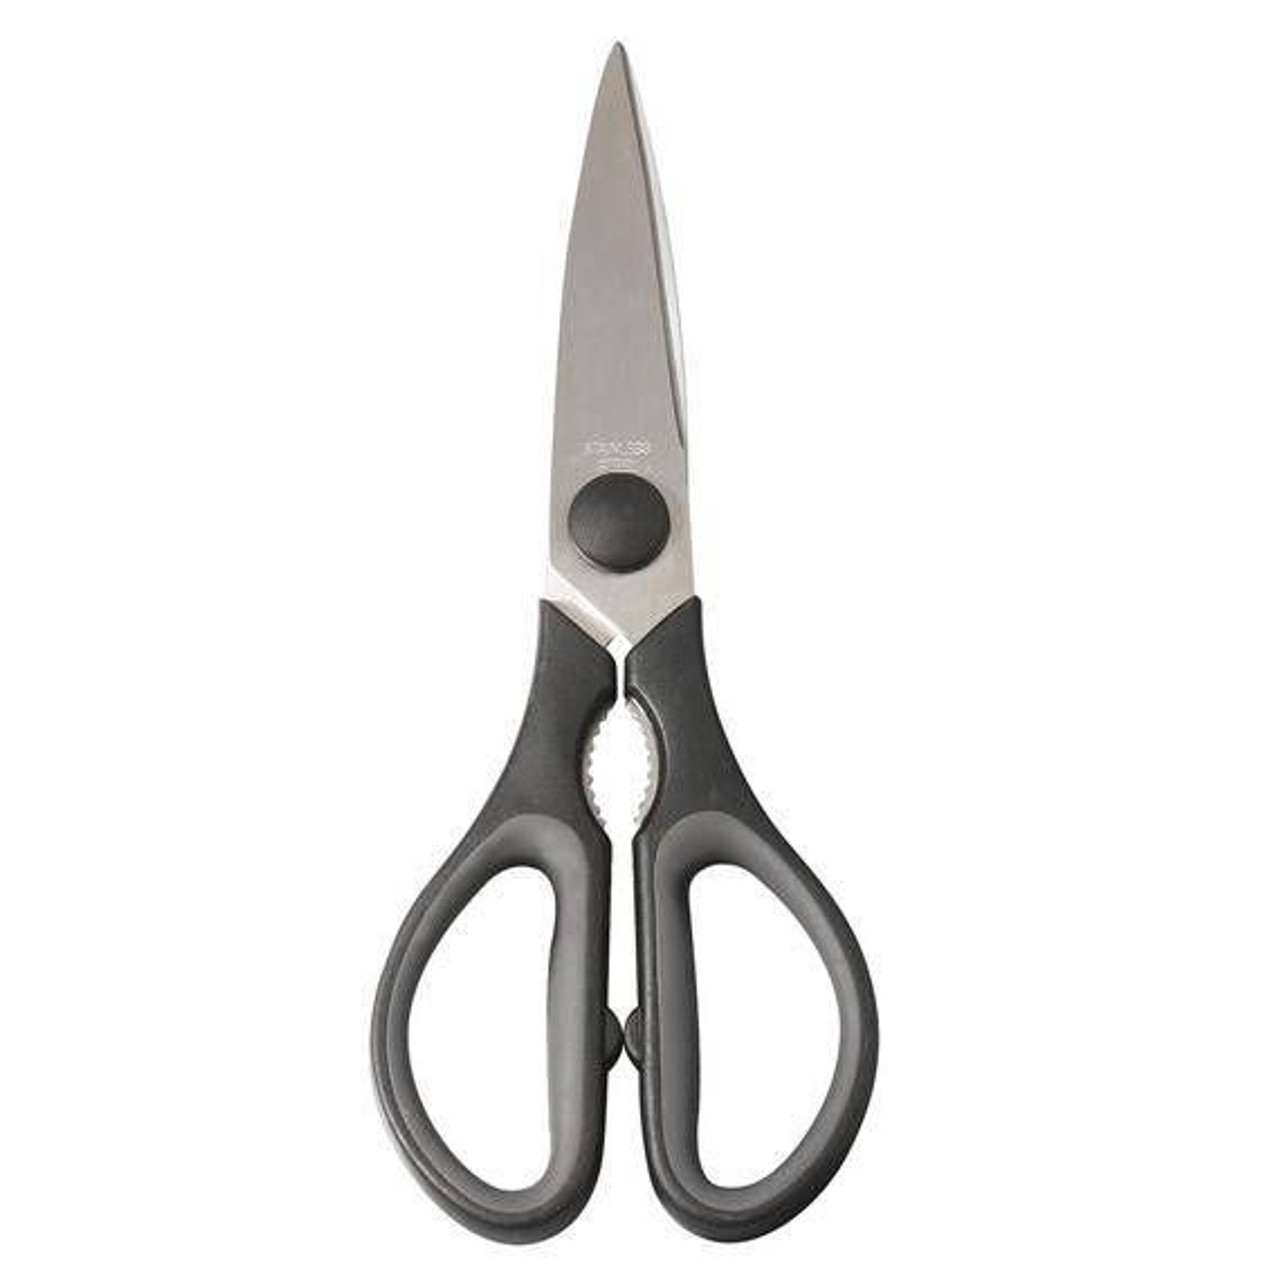 https://cdn11.bigcommerce.com/s-q0oajb576s/images/stencil/1280x1280/products/1236/3474/8-kitchen-shears-stainless-steel-with-unique-cushion-grip-handle-11__04739.1637184255.jpg?c=1